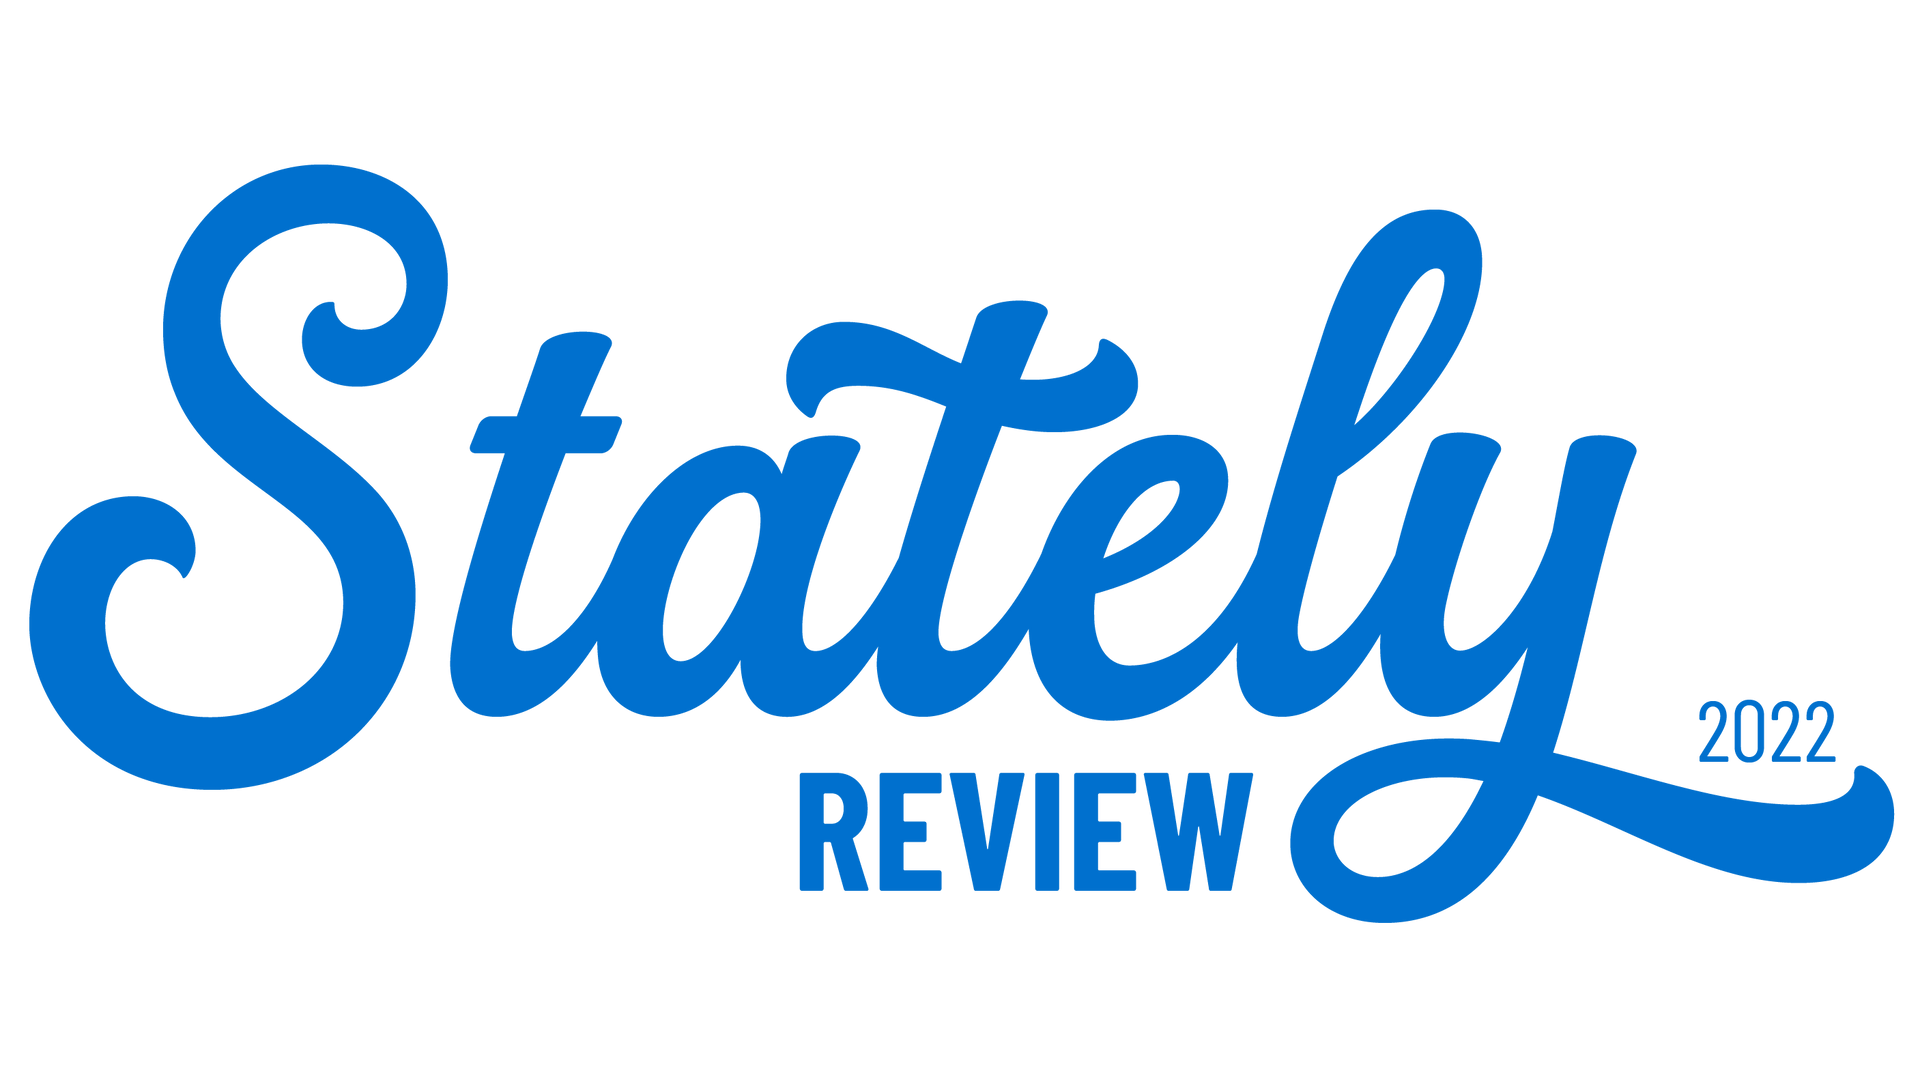 Stately Review logo